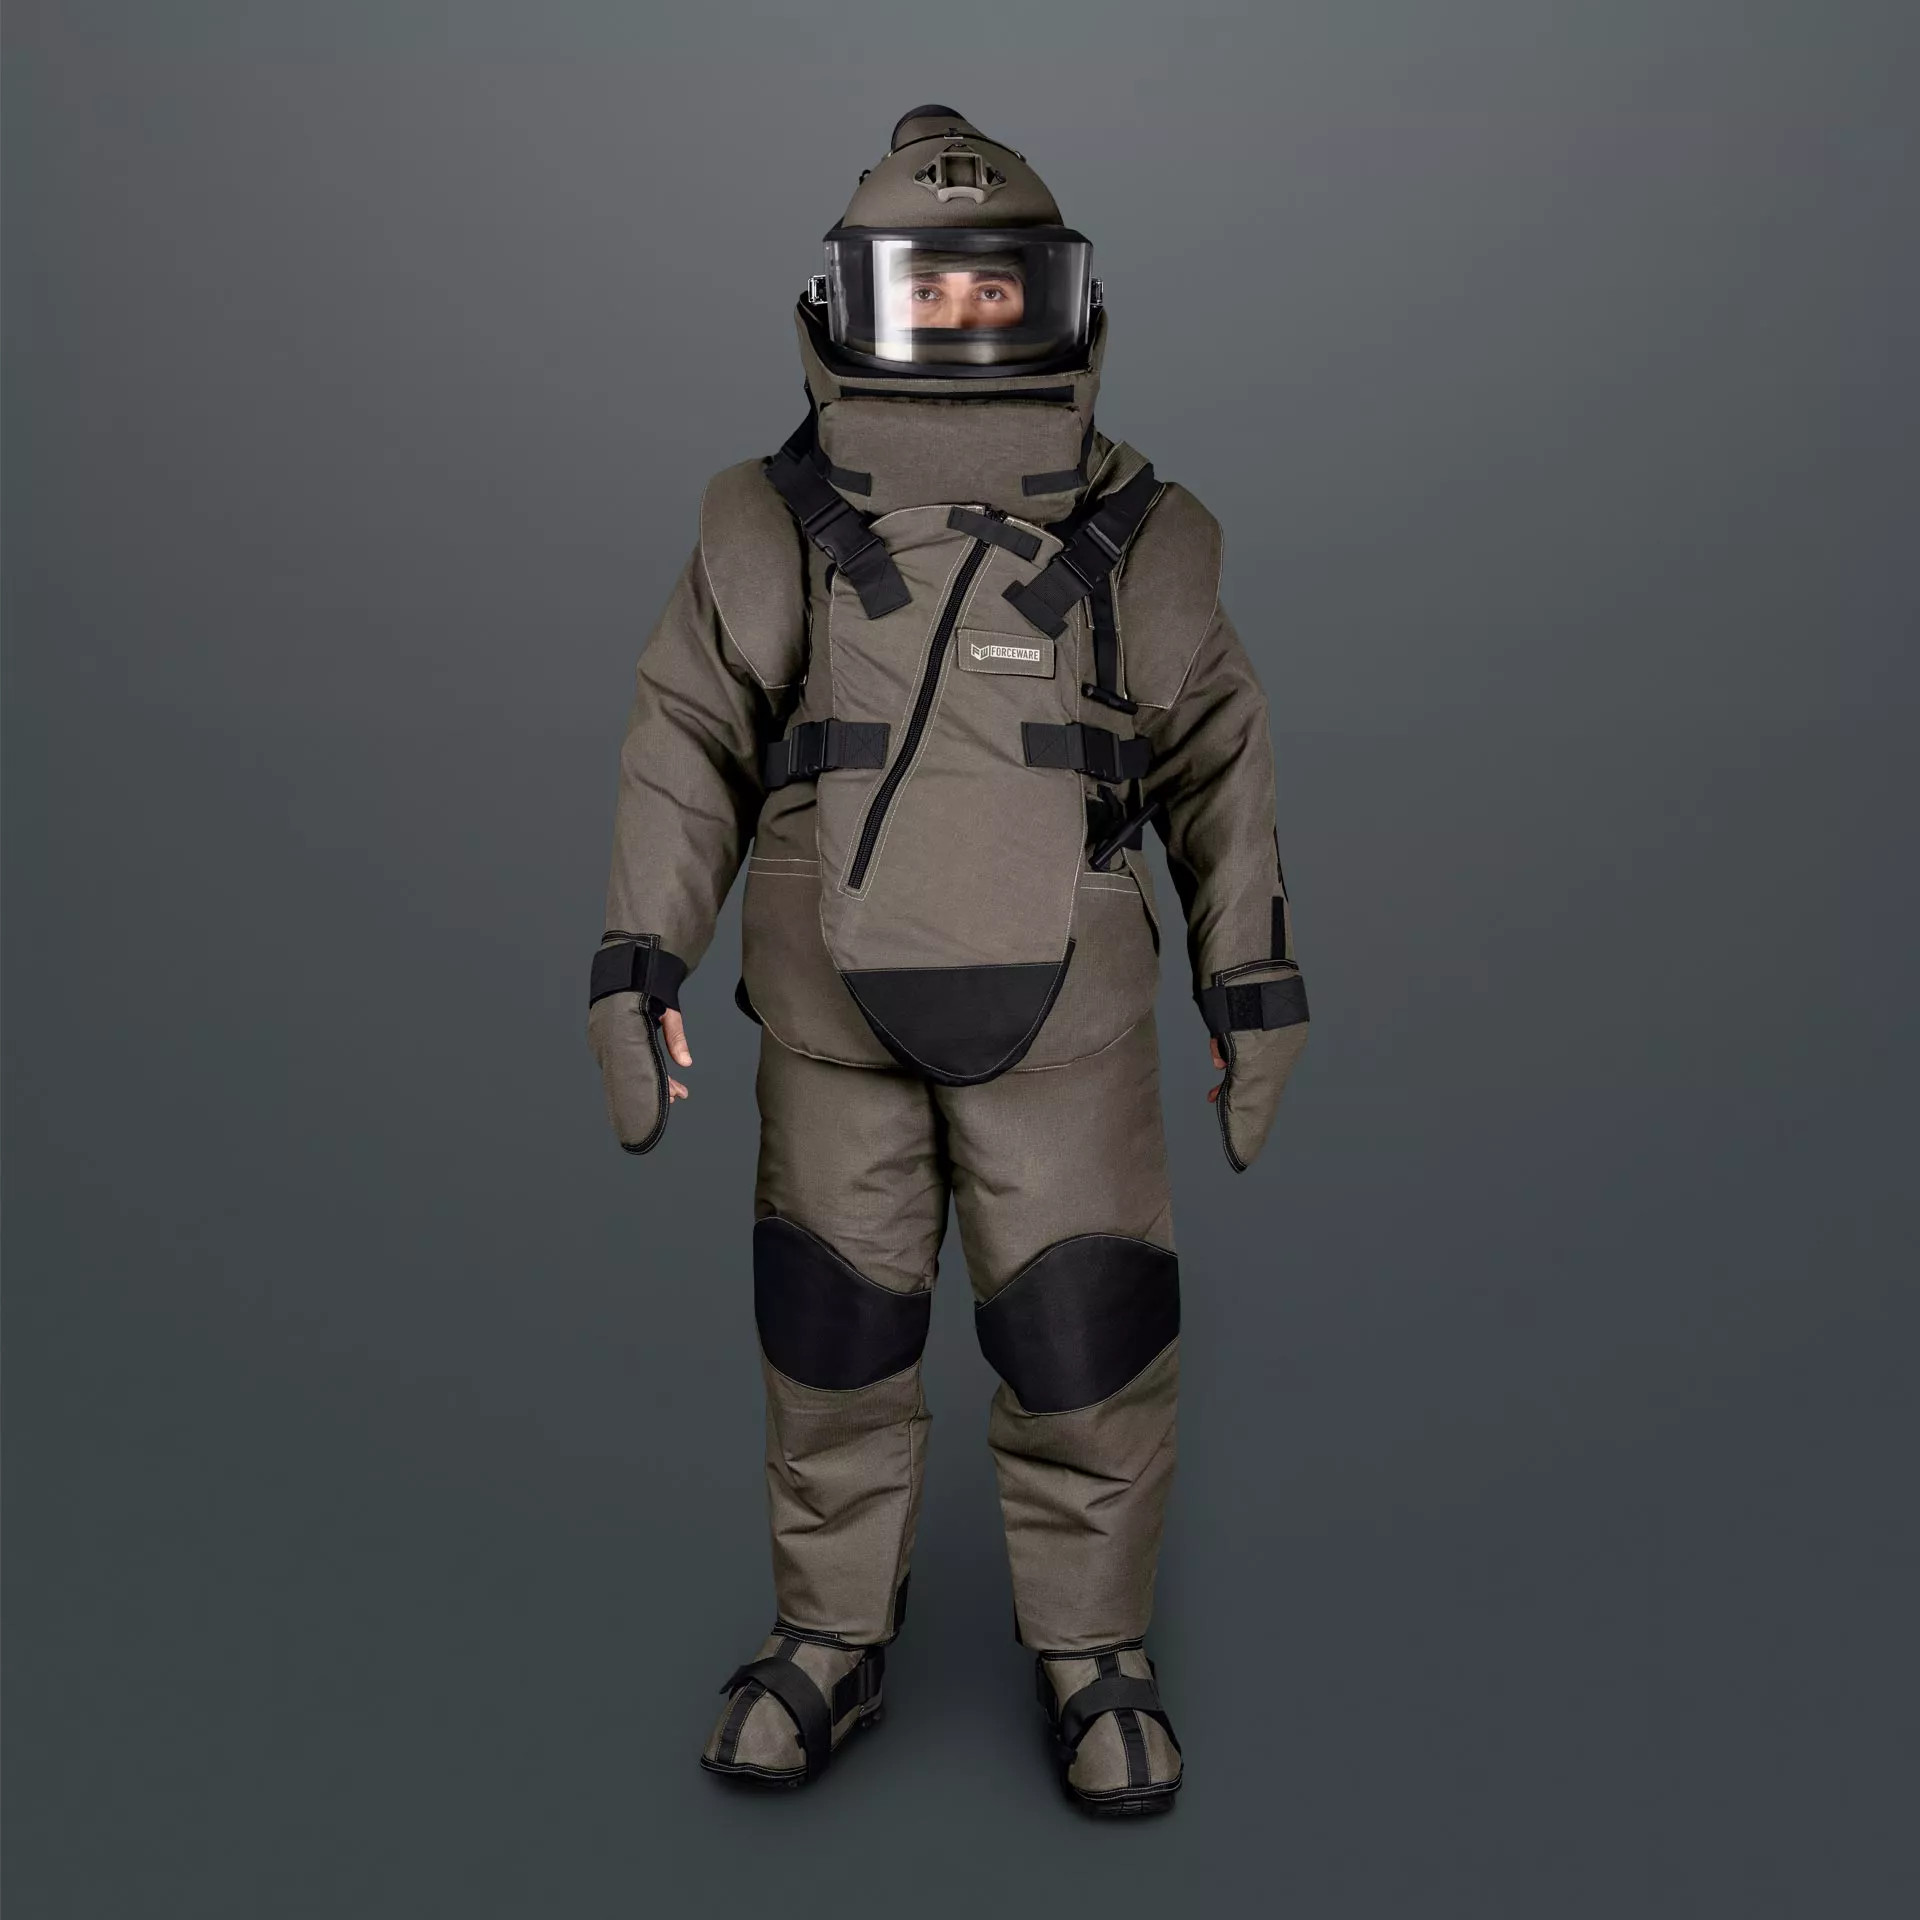 EOD advanced bomb disposal suit - 3DX-RAY